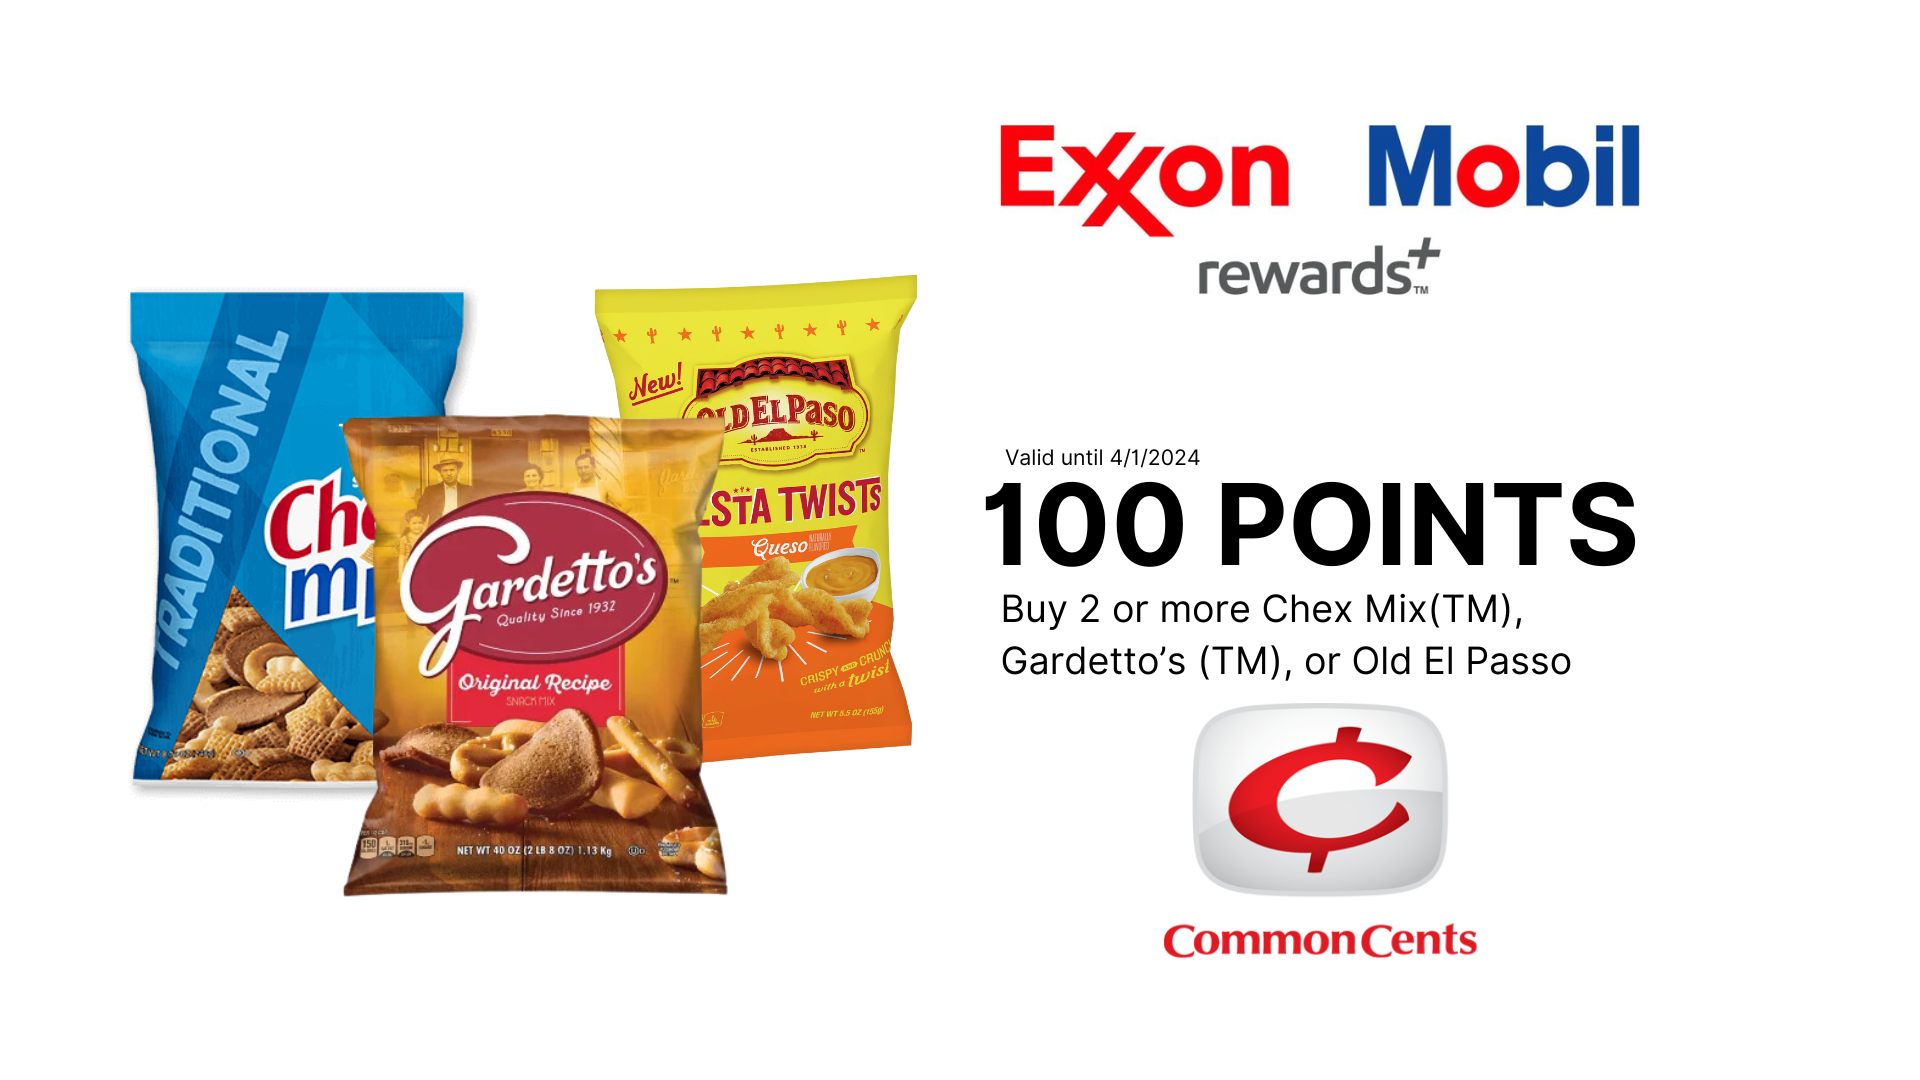 Chex Mix (TM), Gardetto's (TM) or Old El Passo 2 or More 